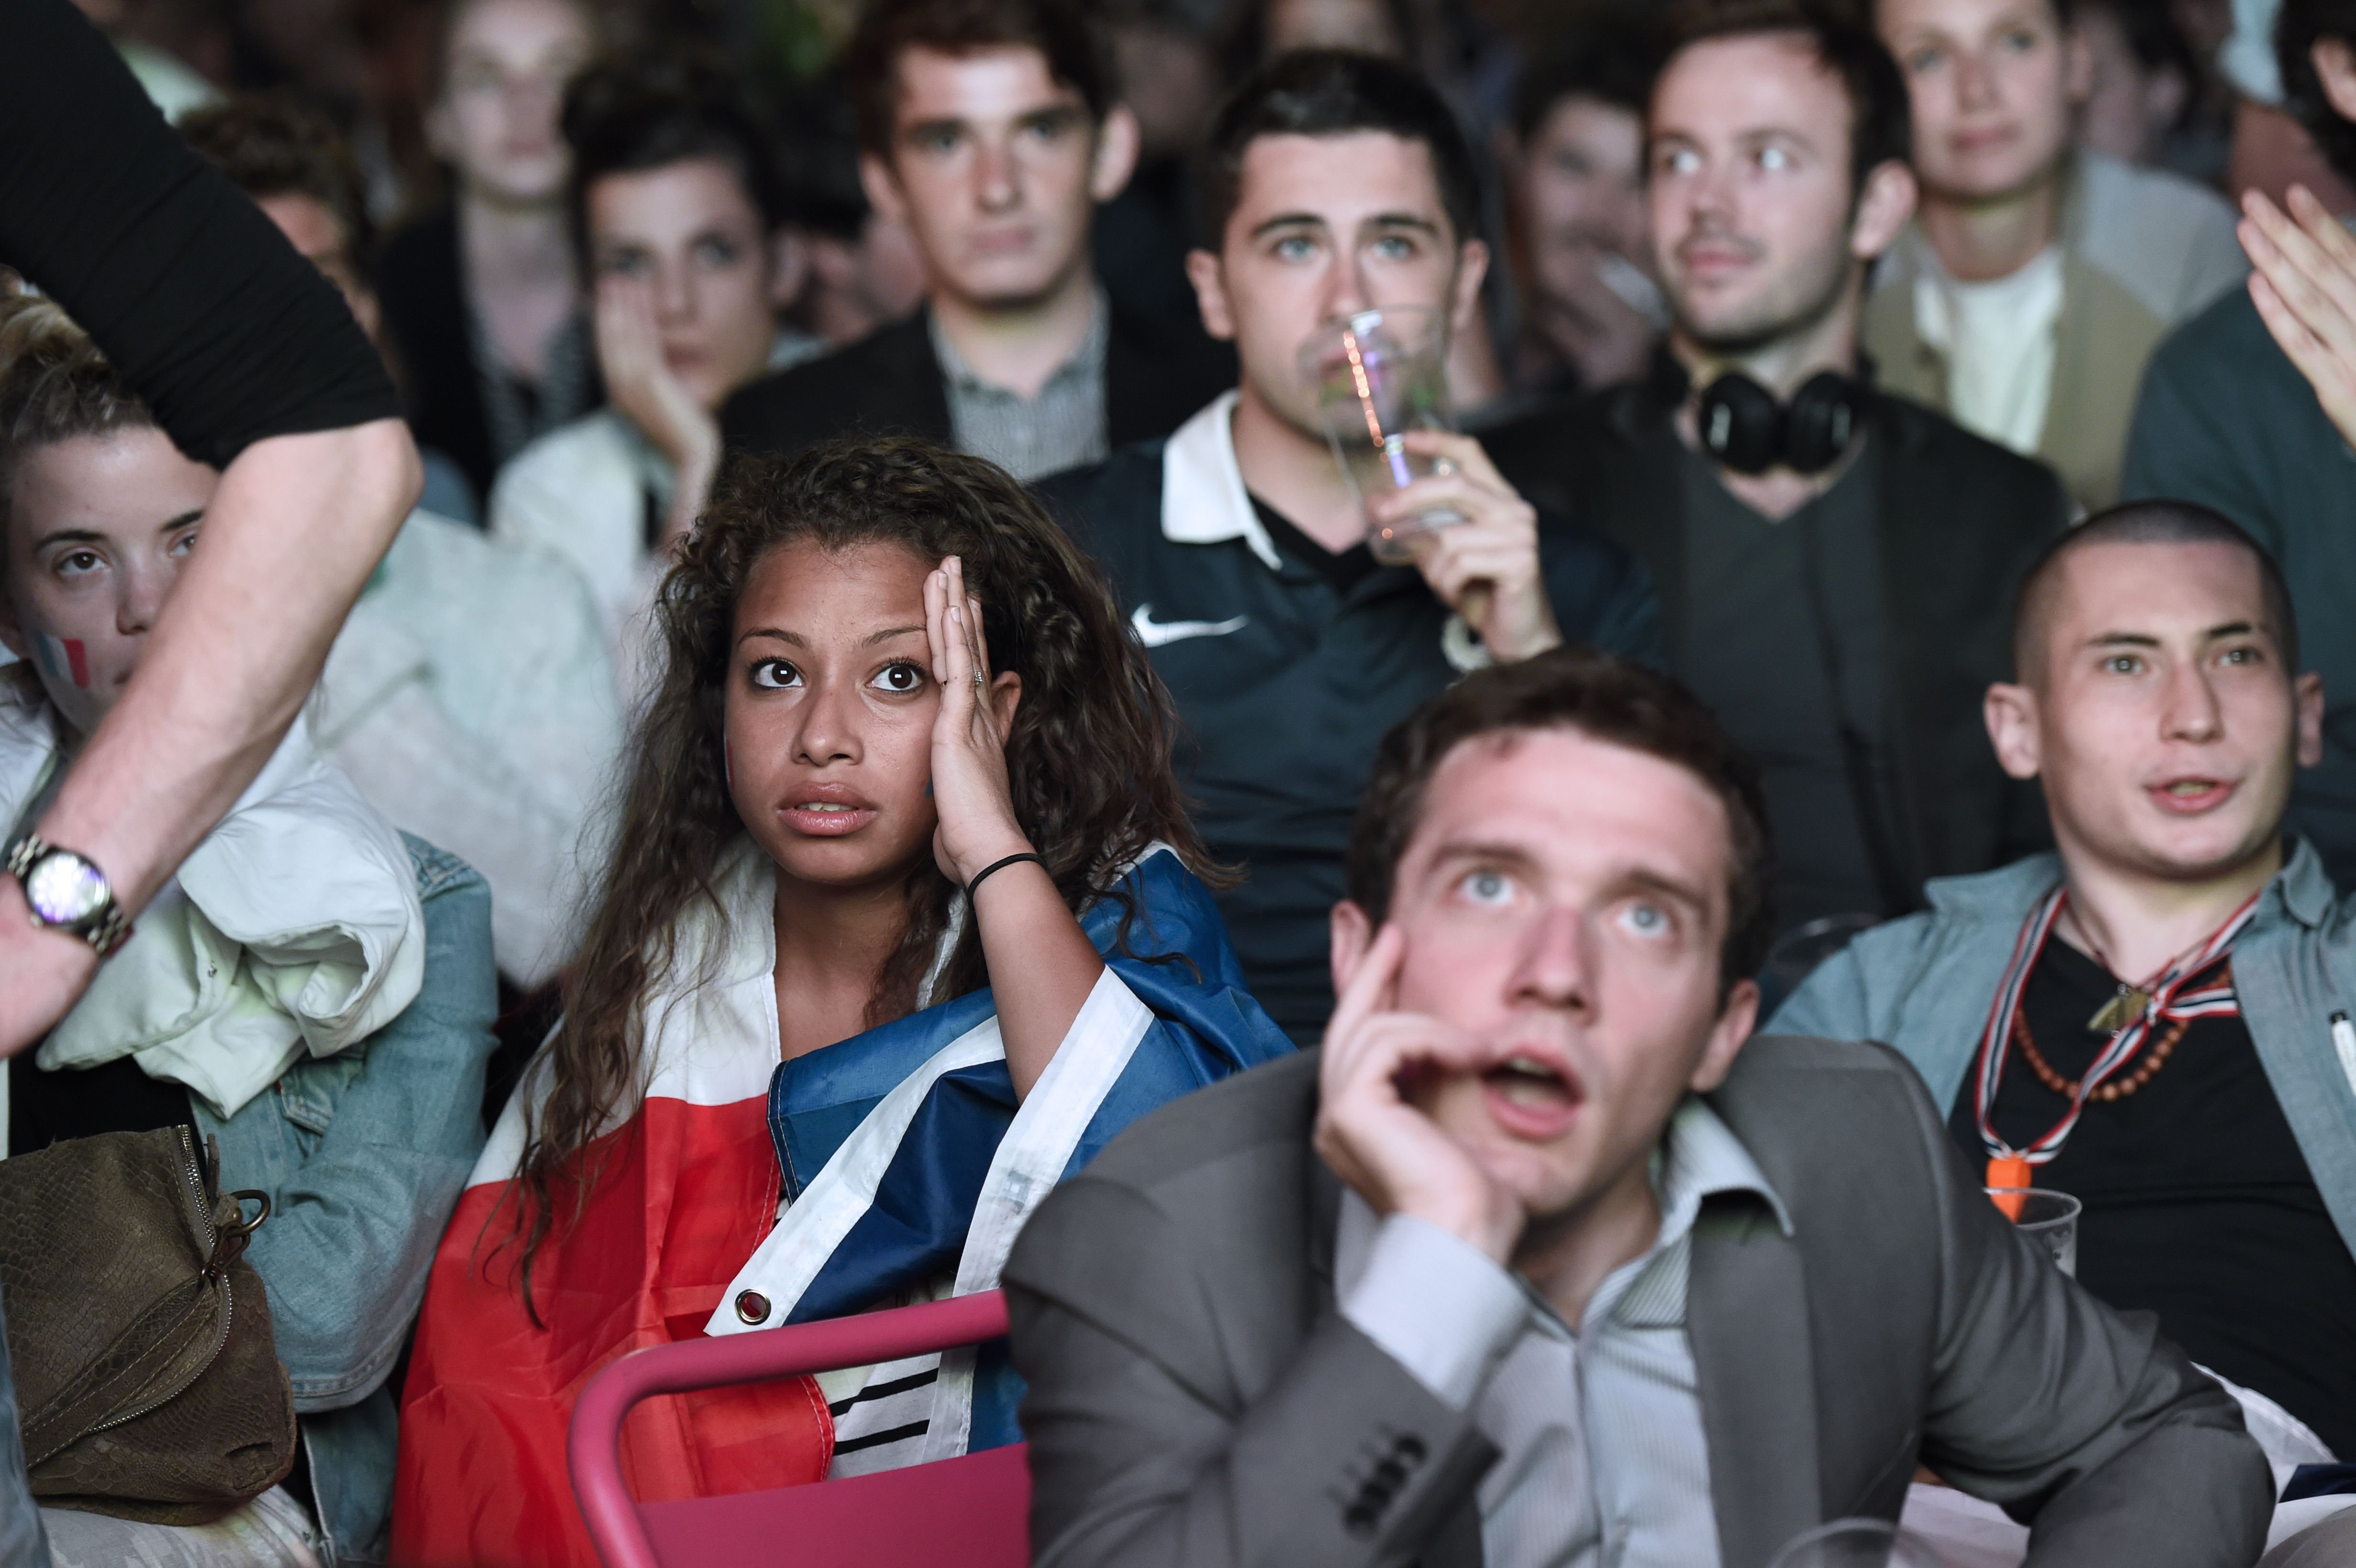 Spectators react as they watch the match between France and Ecuador on a screen in central Paris on June 25, 2014.